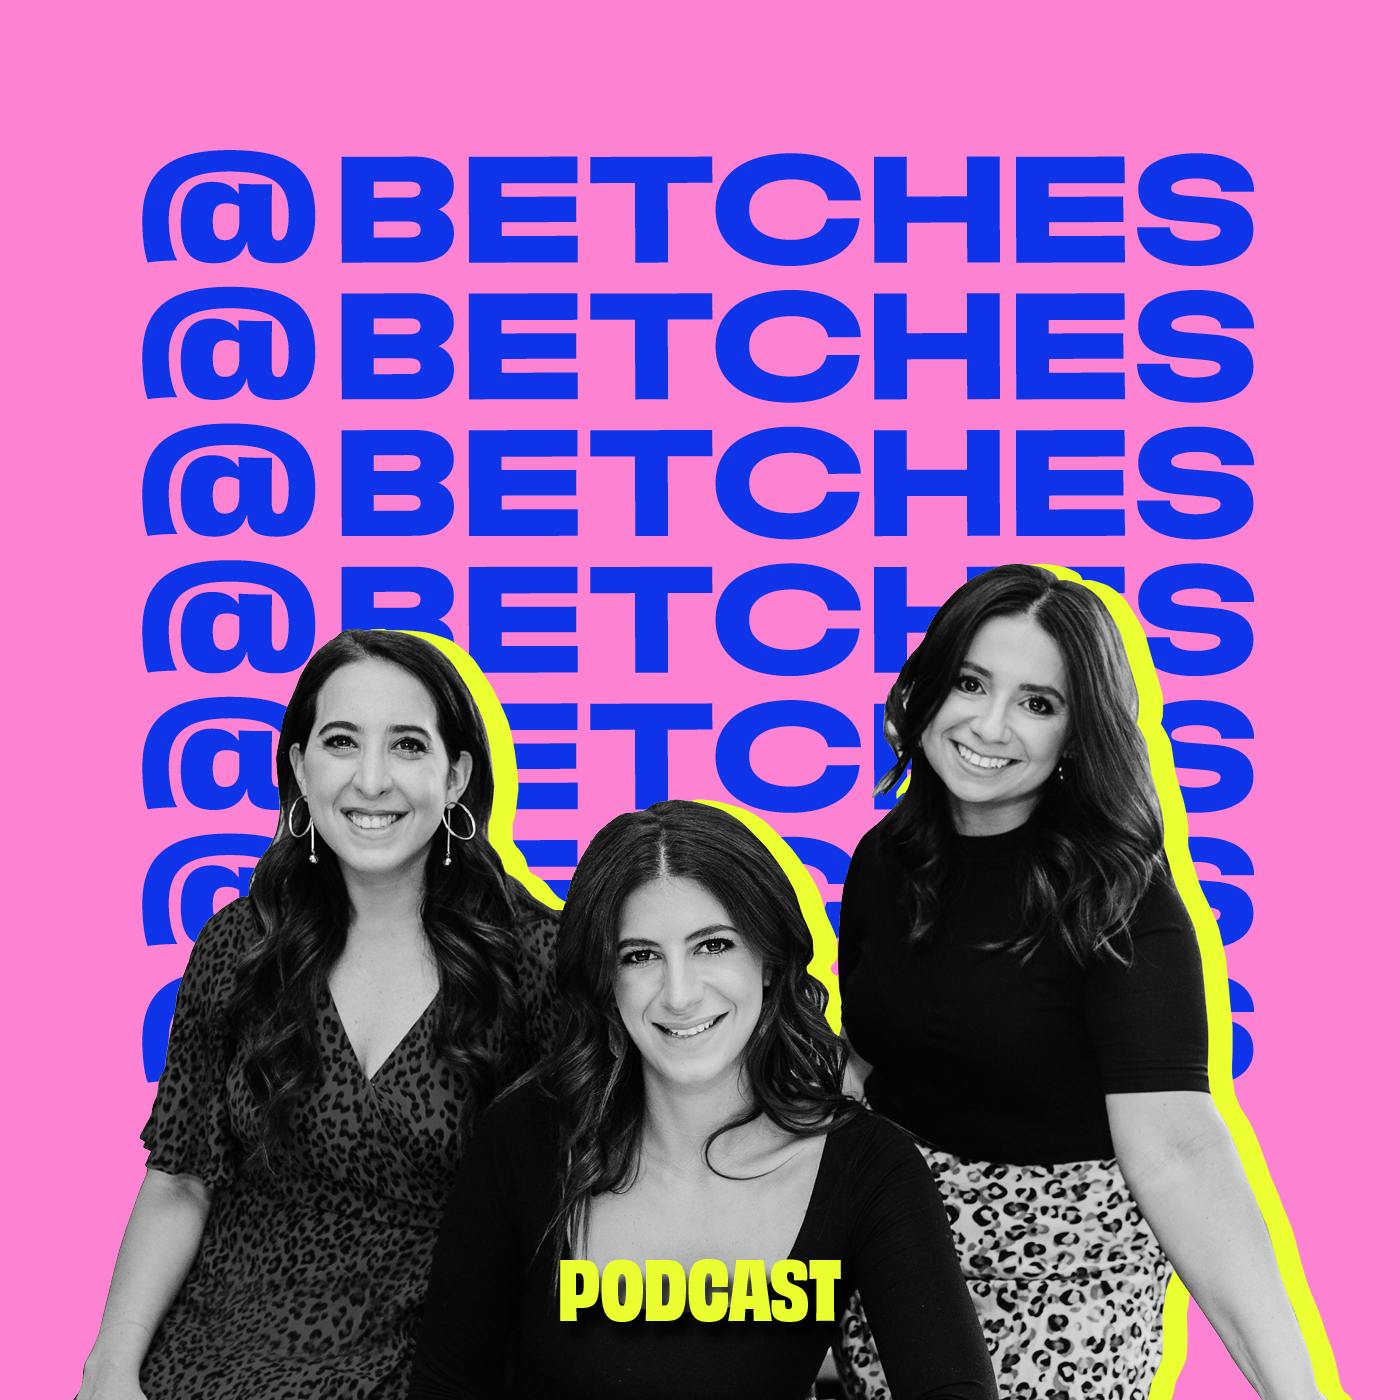 Ariana Grande Nude Lesbian Peeing - Betches - Podcast Addict